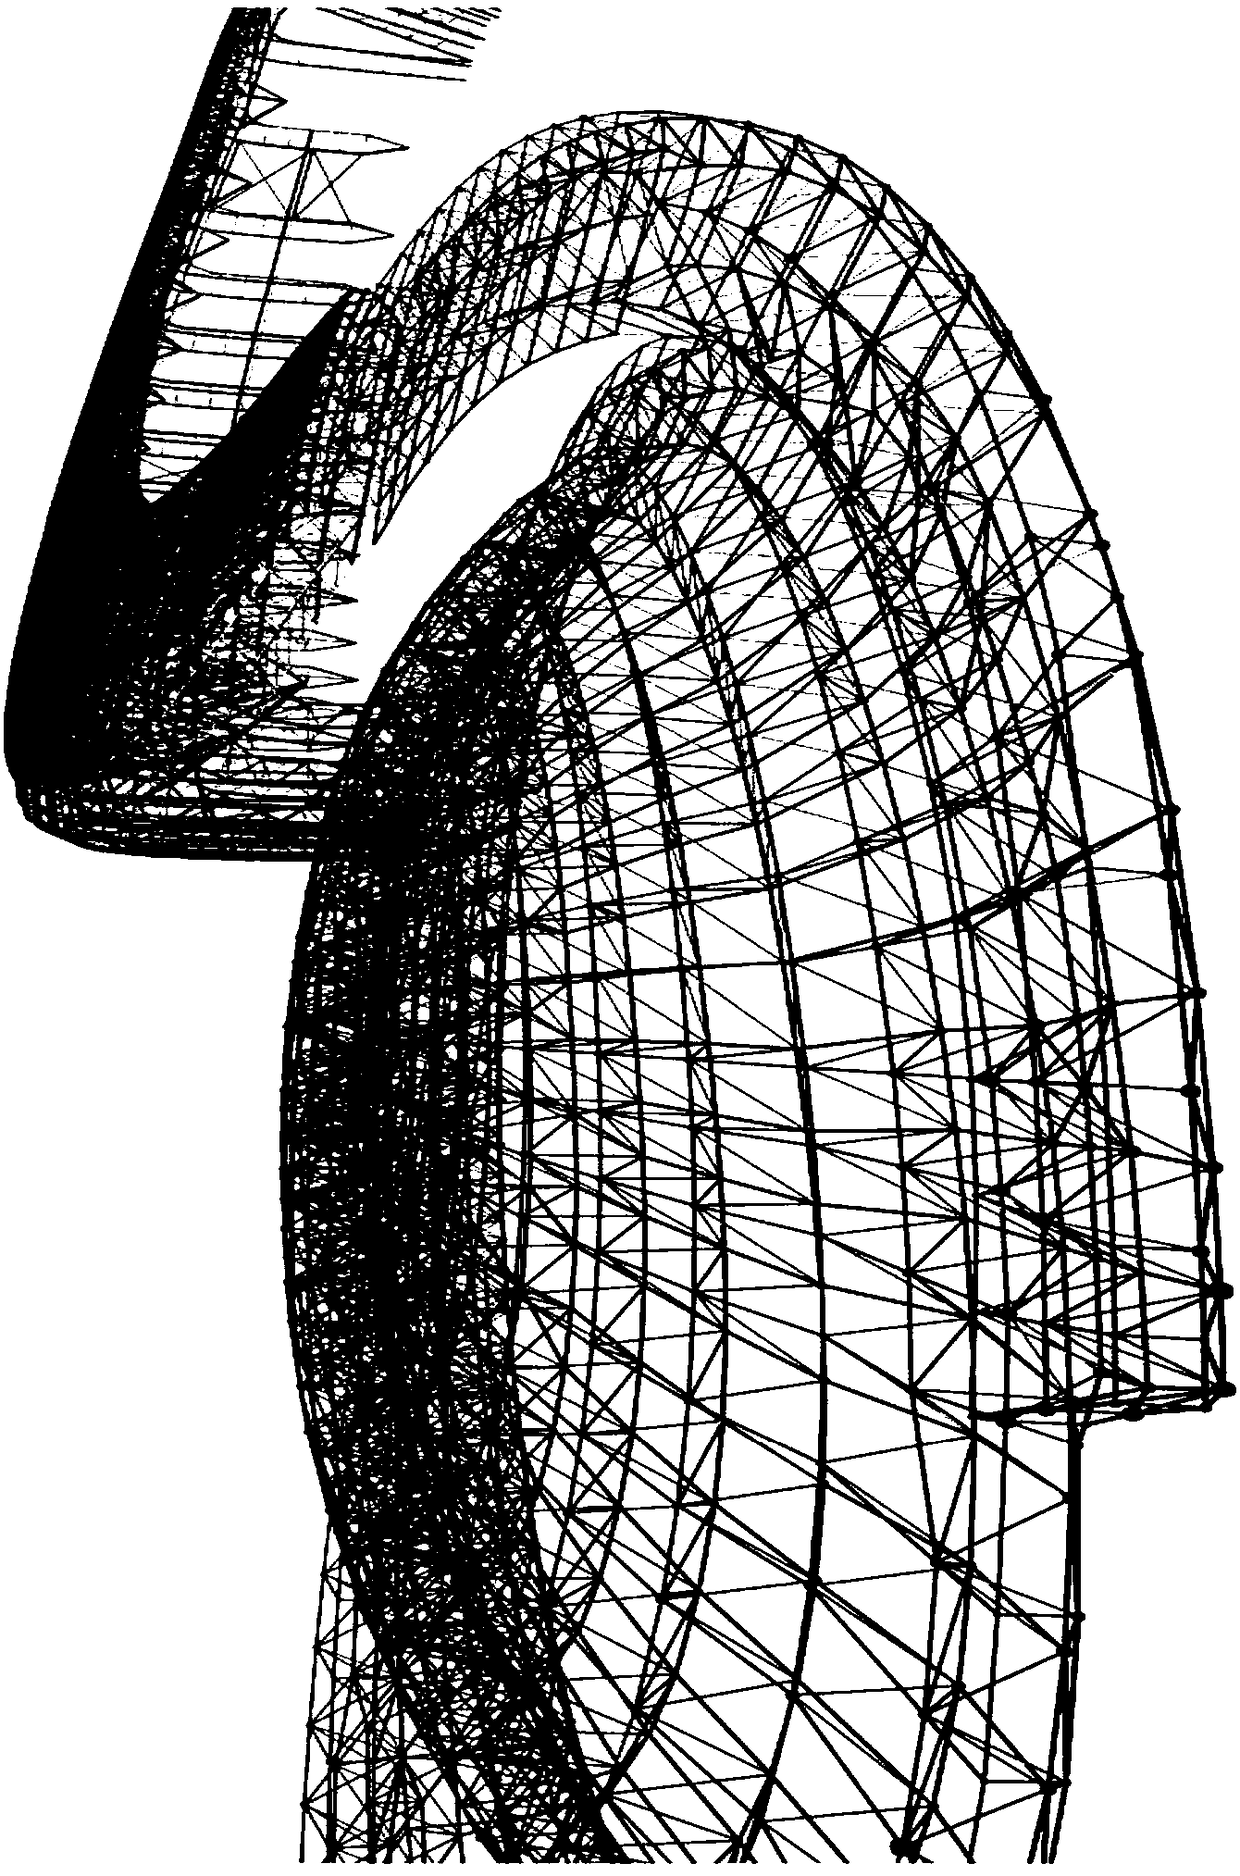 Reticulated shell structure modeling method